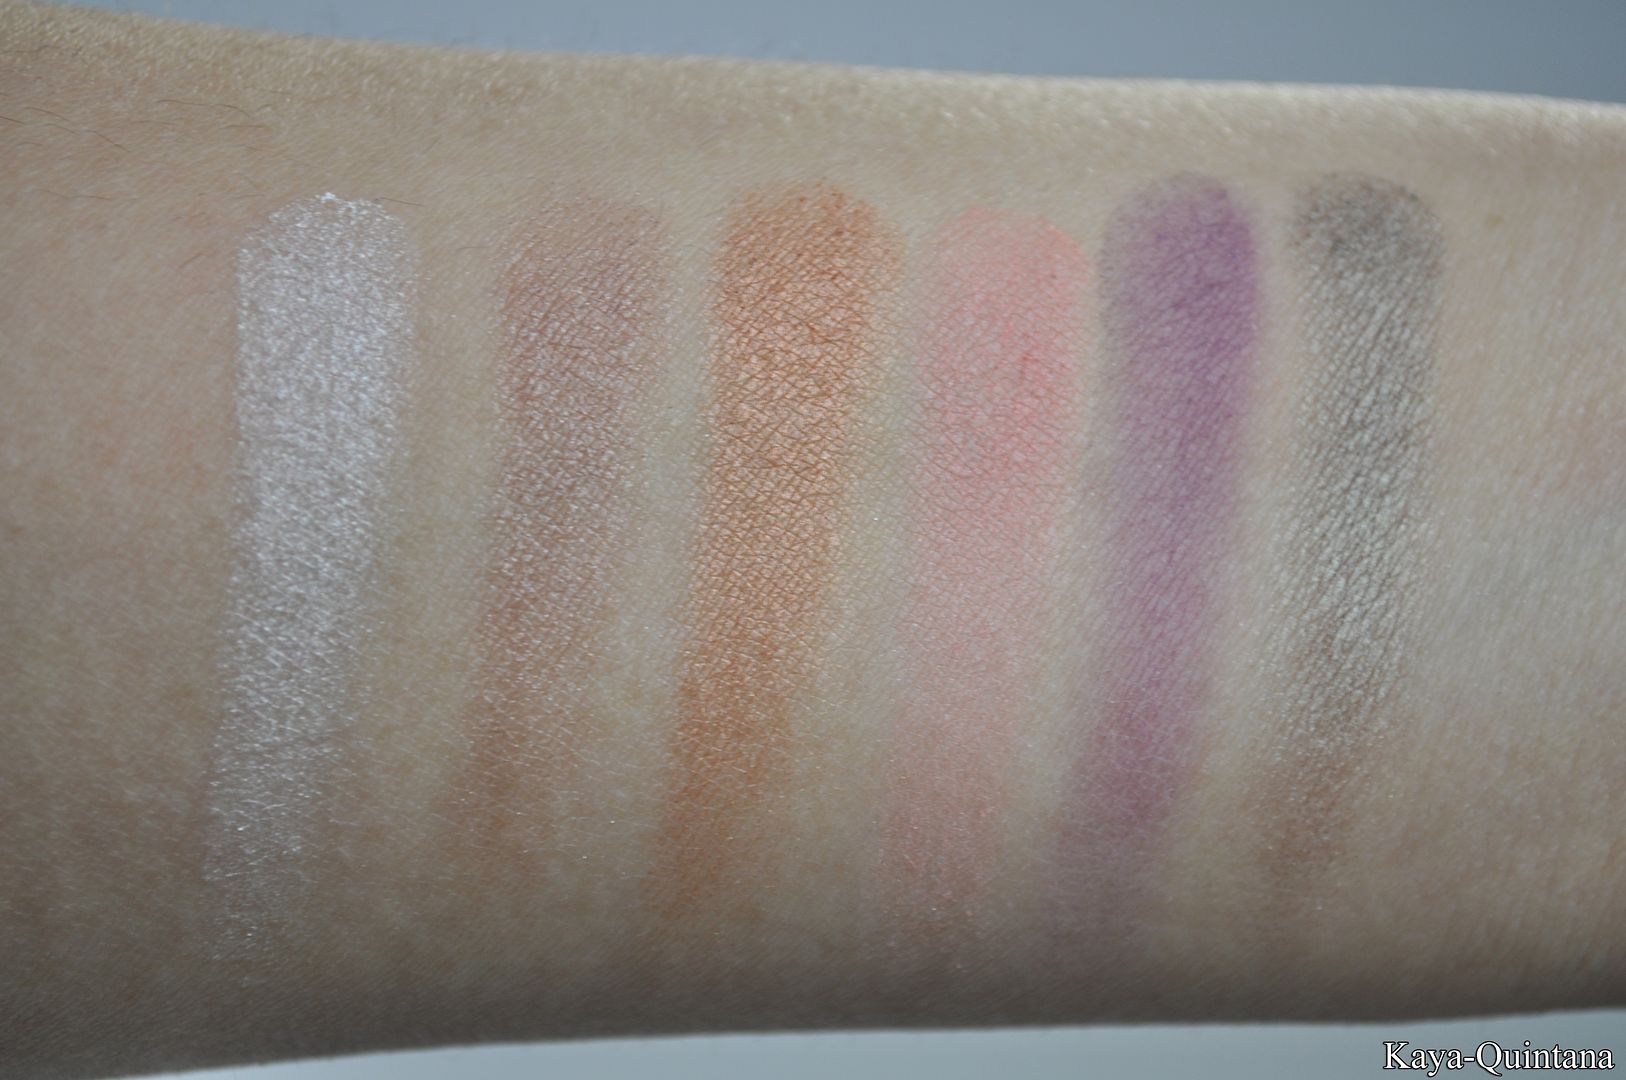 bh cosmetics special occasion eyeshadow swatches